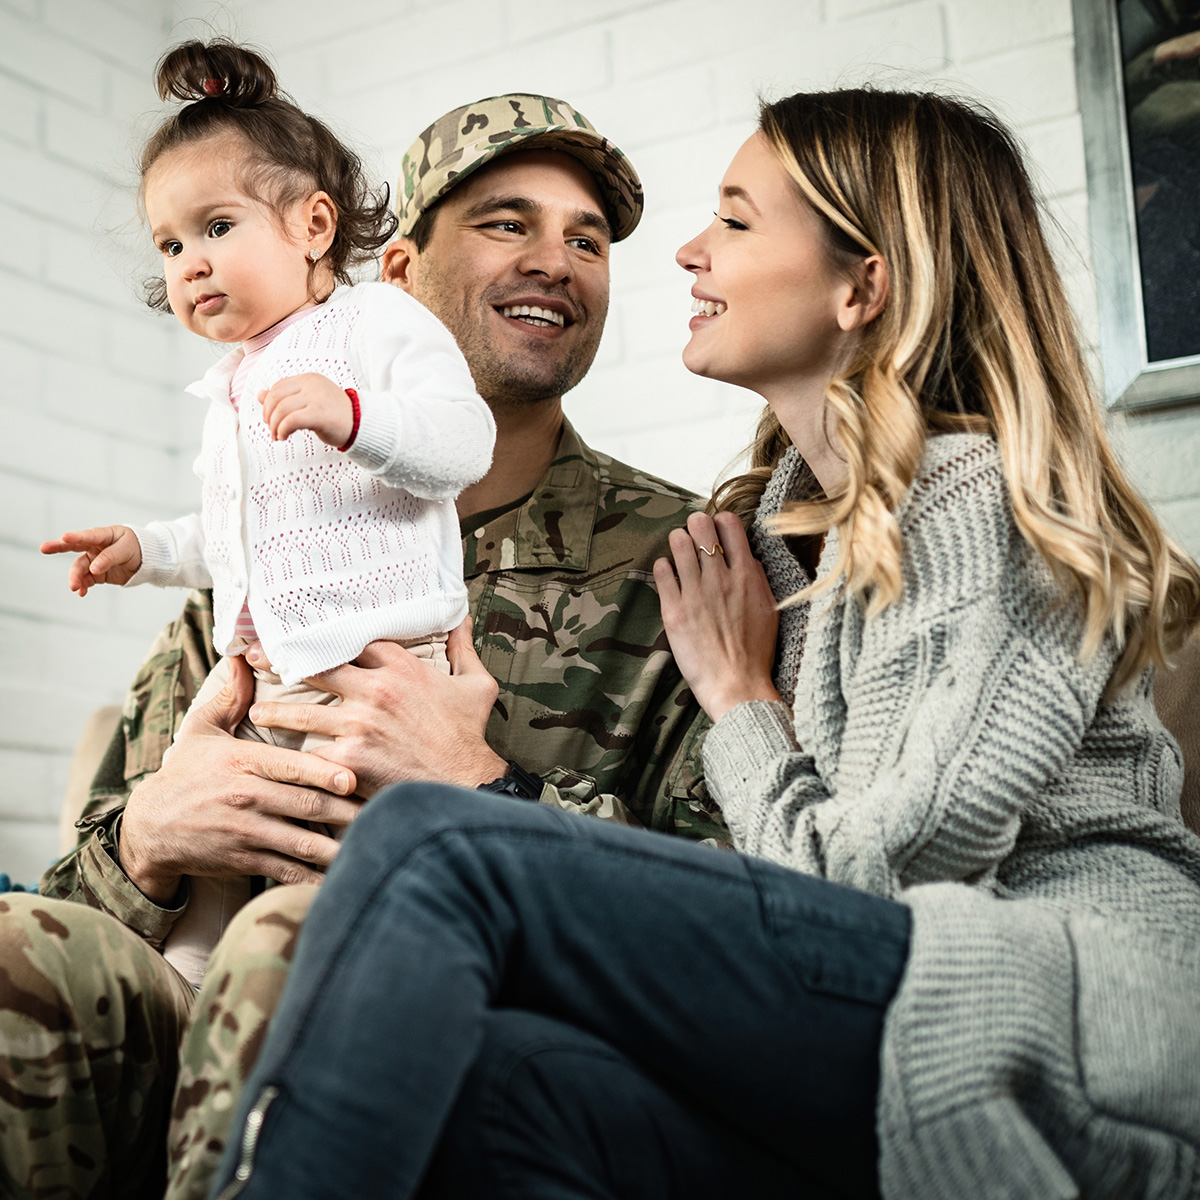 A man in a military uniform reunites with his family.